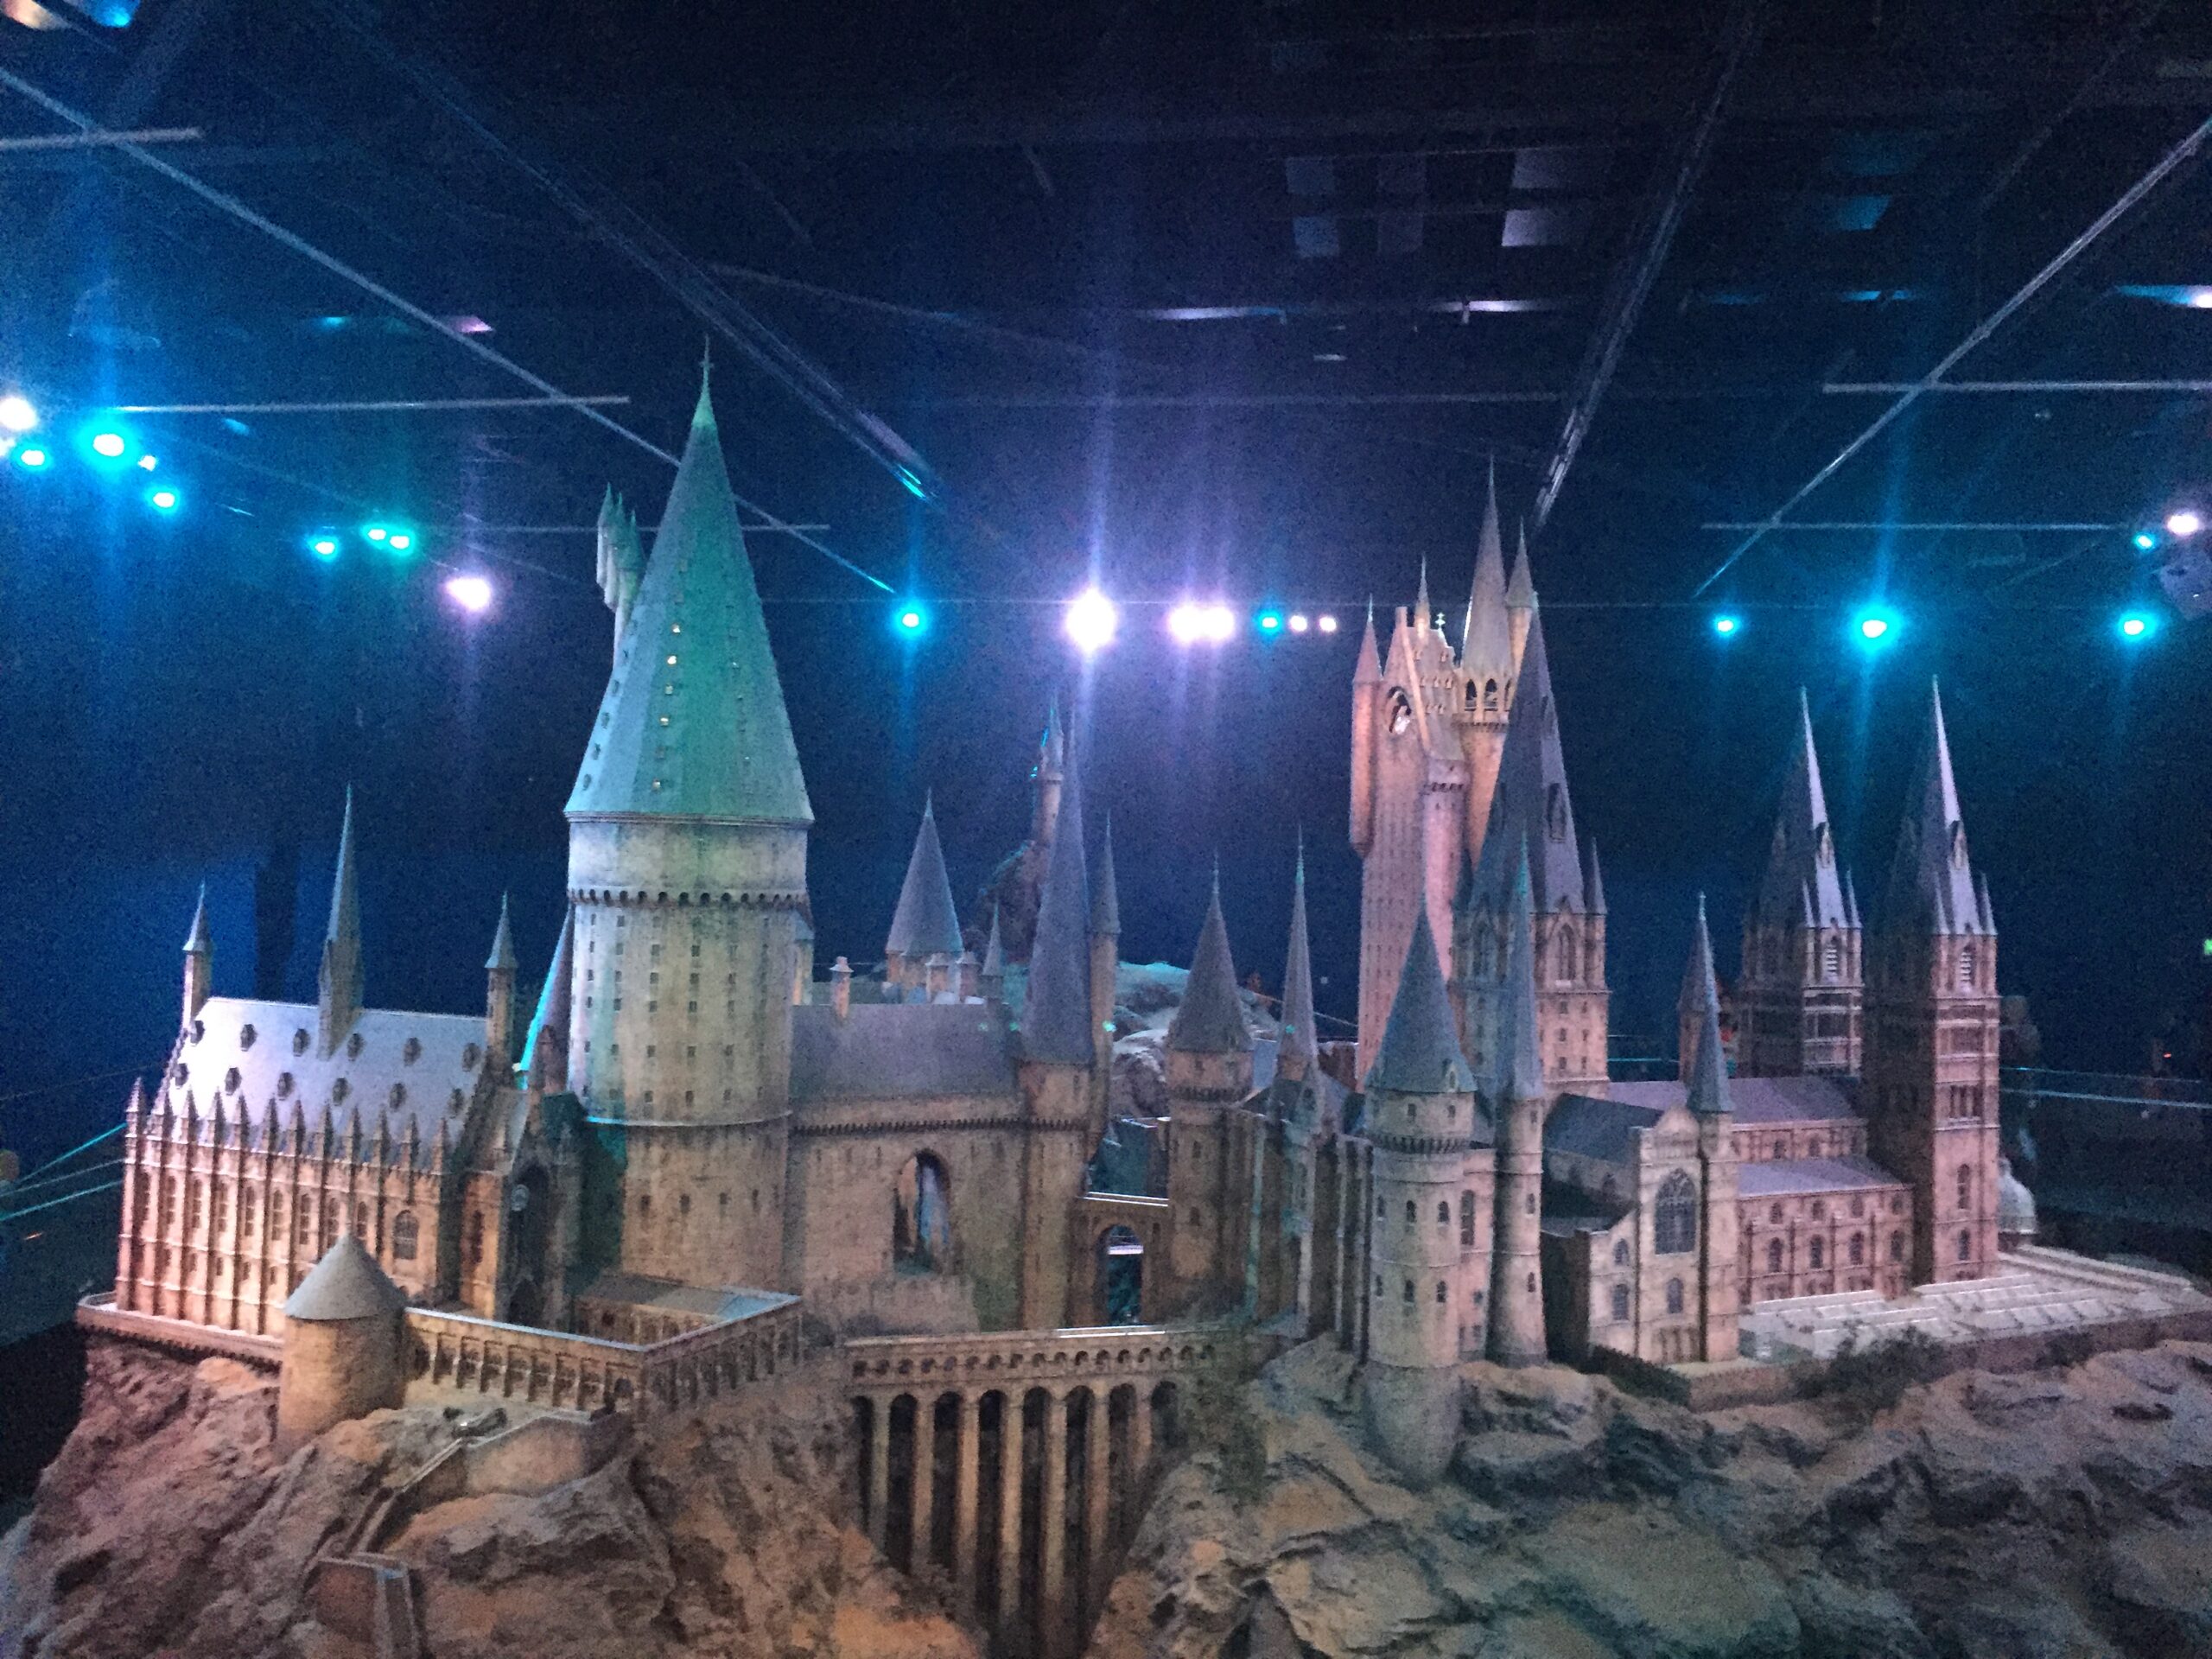 Seeing this huge model of Hogwarts that was used in aerial shots was emotional, and I am not ashamed to say I definitely cried.